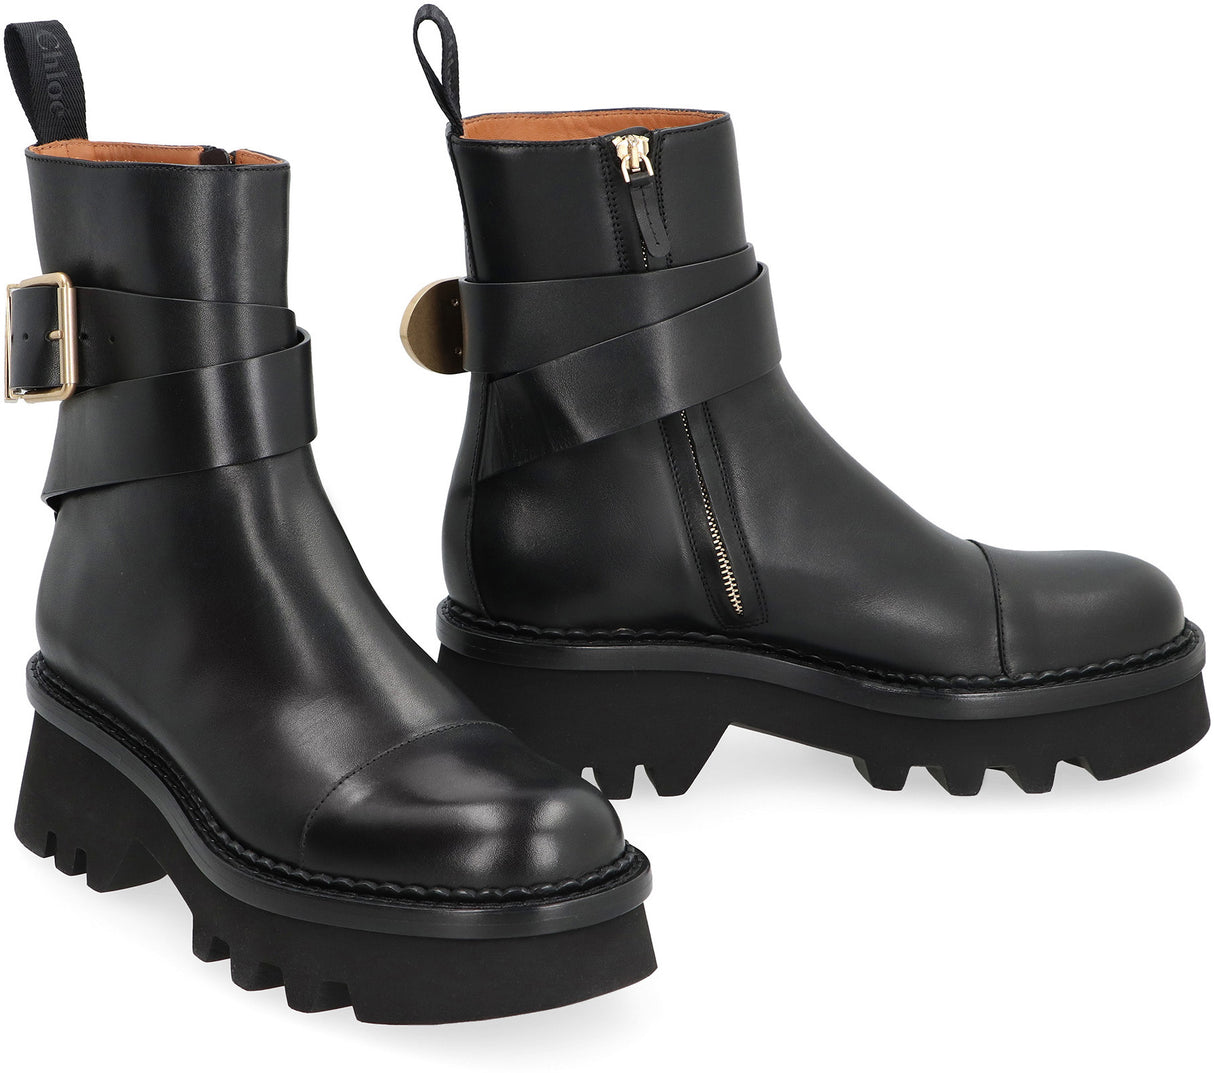 CHLOÉ Adjustable Leather Ankle Boots with Side Zip Closure for Women